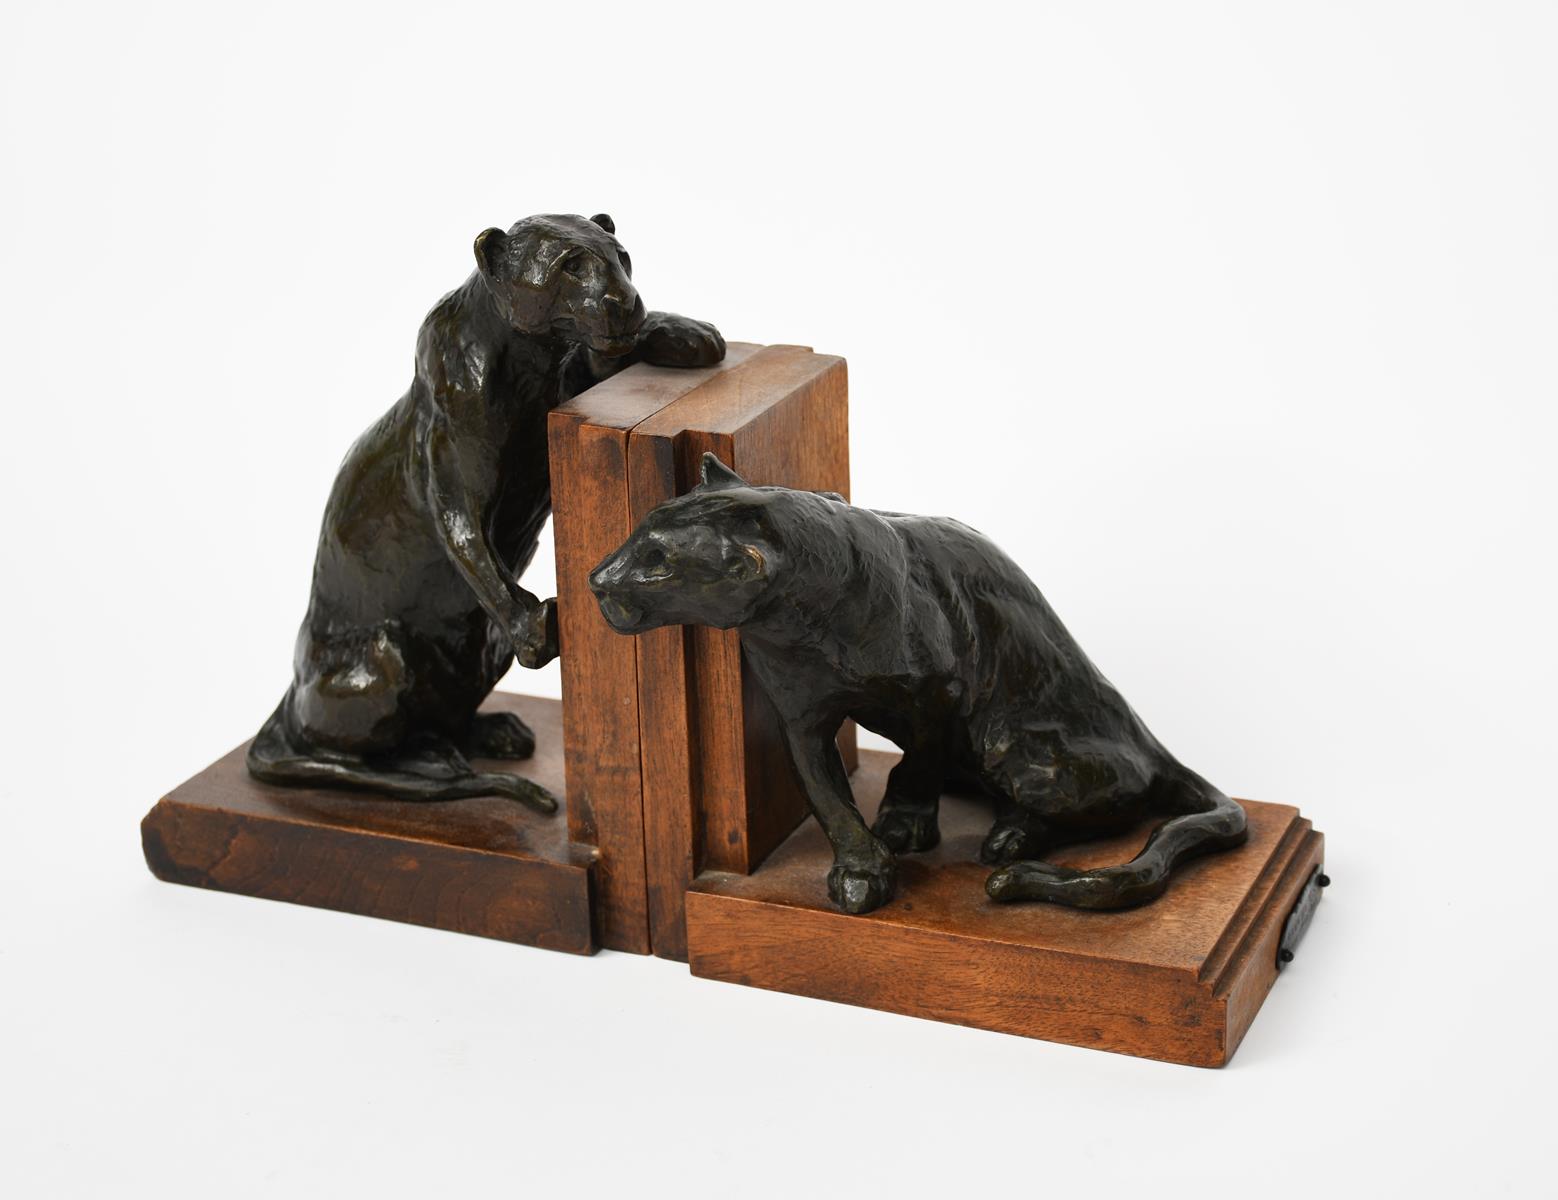 Roger Godchaux (1878-1958) Panthers a pair of patinated bronze book ends, wooden bases applied